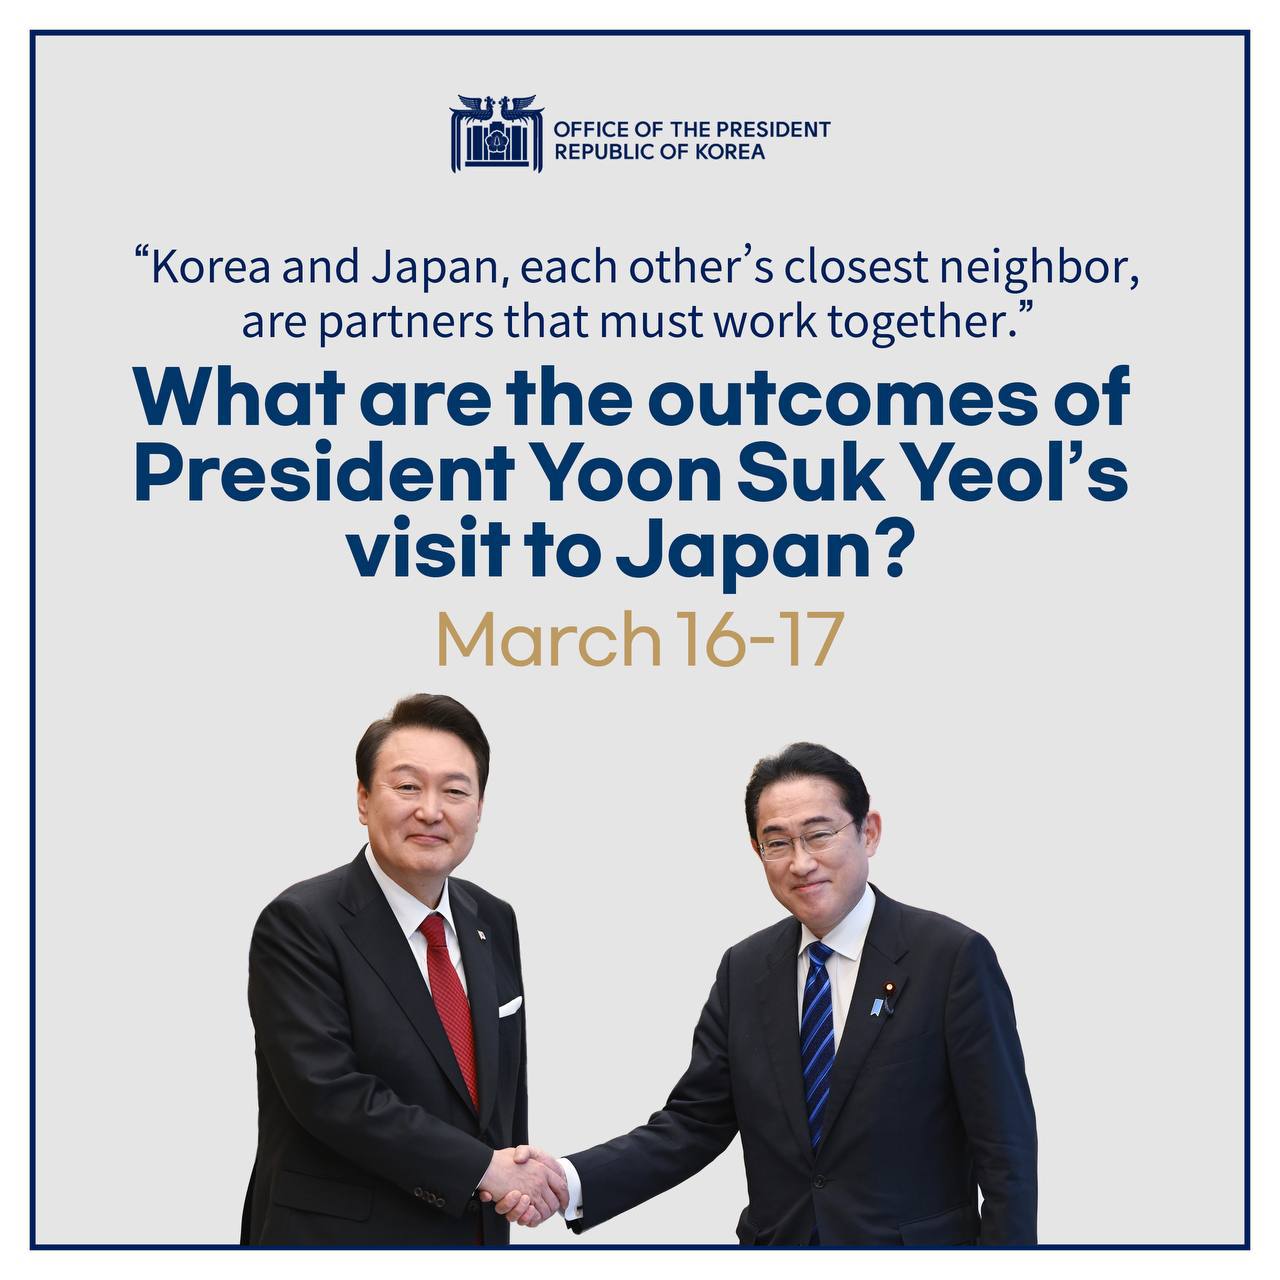 Two-day Visit to Japan, Korea's Closest Neighbor, Brings Cooperation for the Economy, Security and Future Generations slide 1